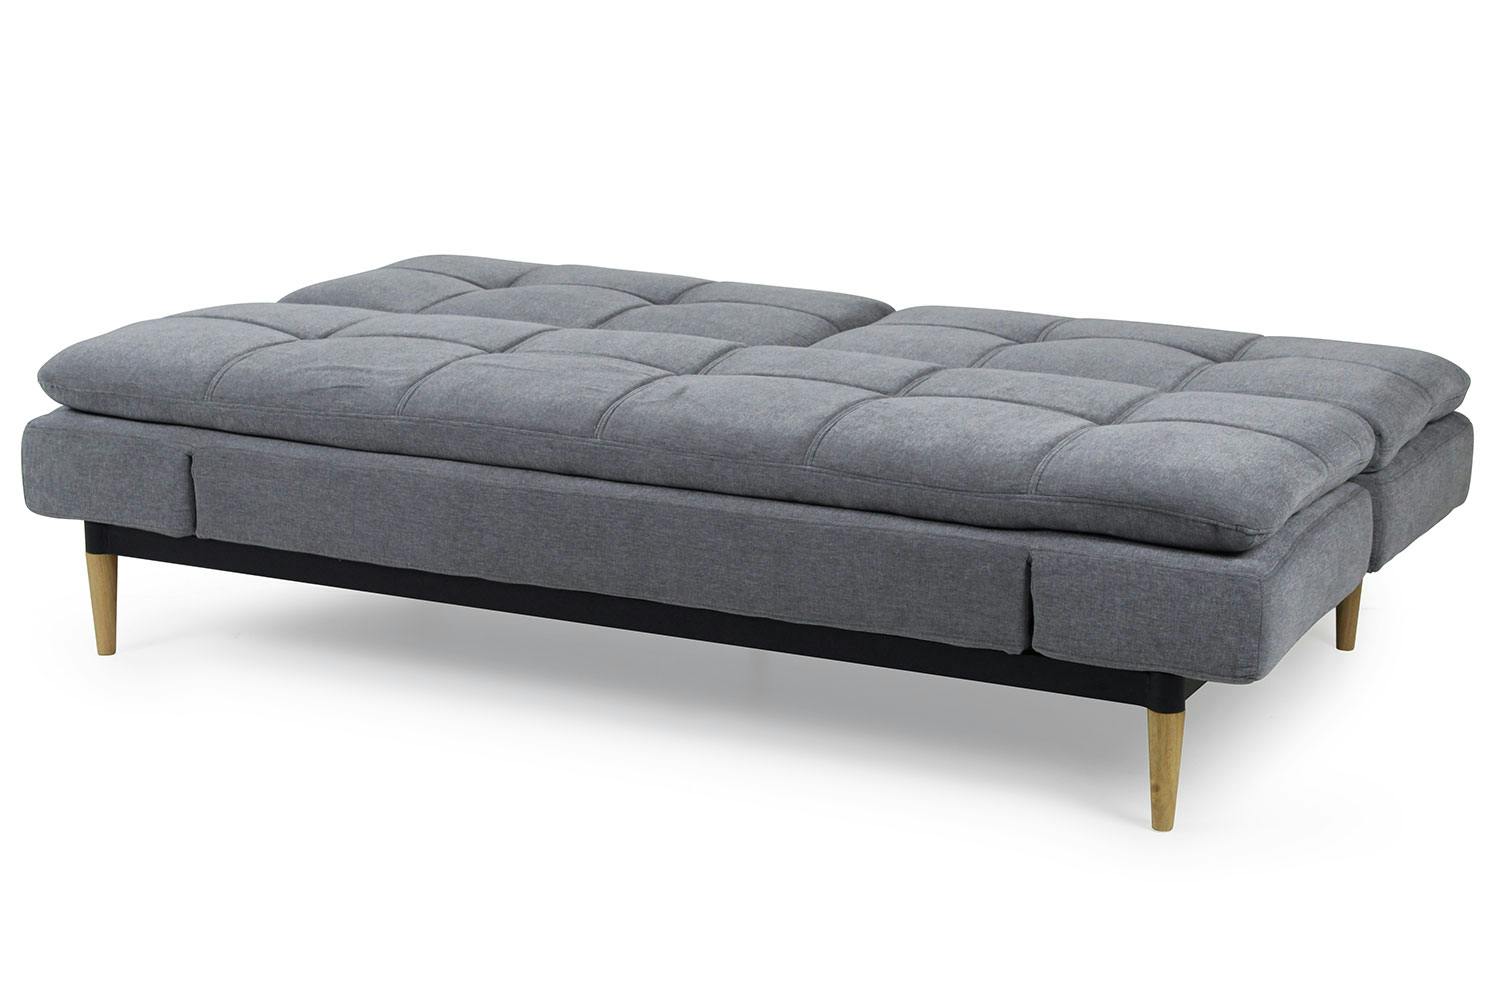 Storm Sofa Bed by Debonaire Furniture